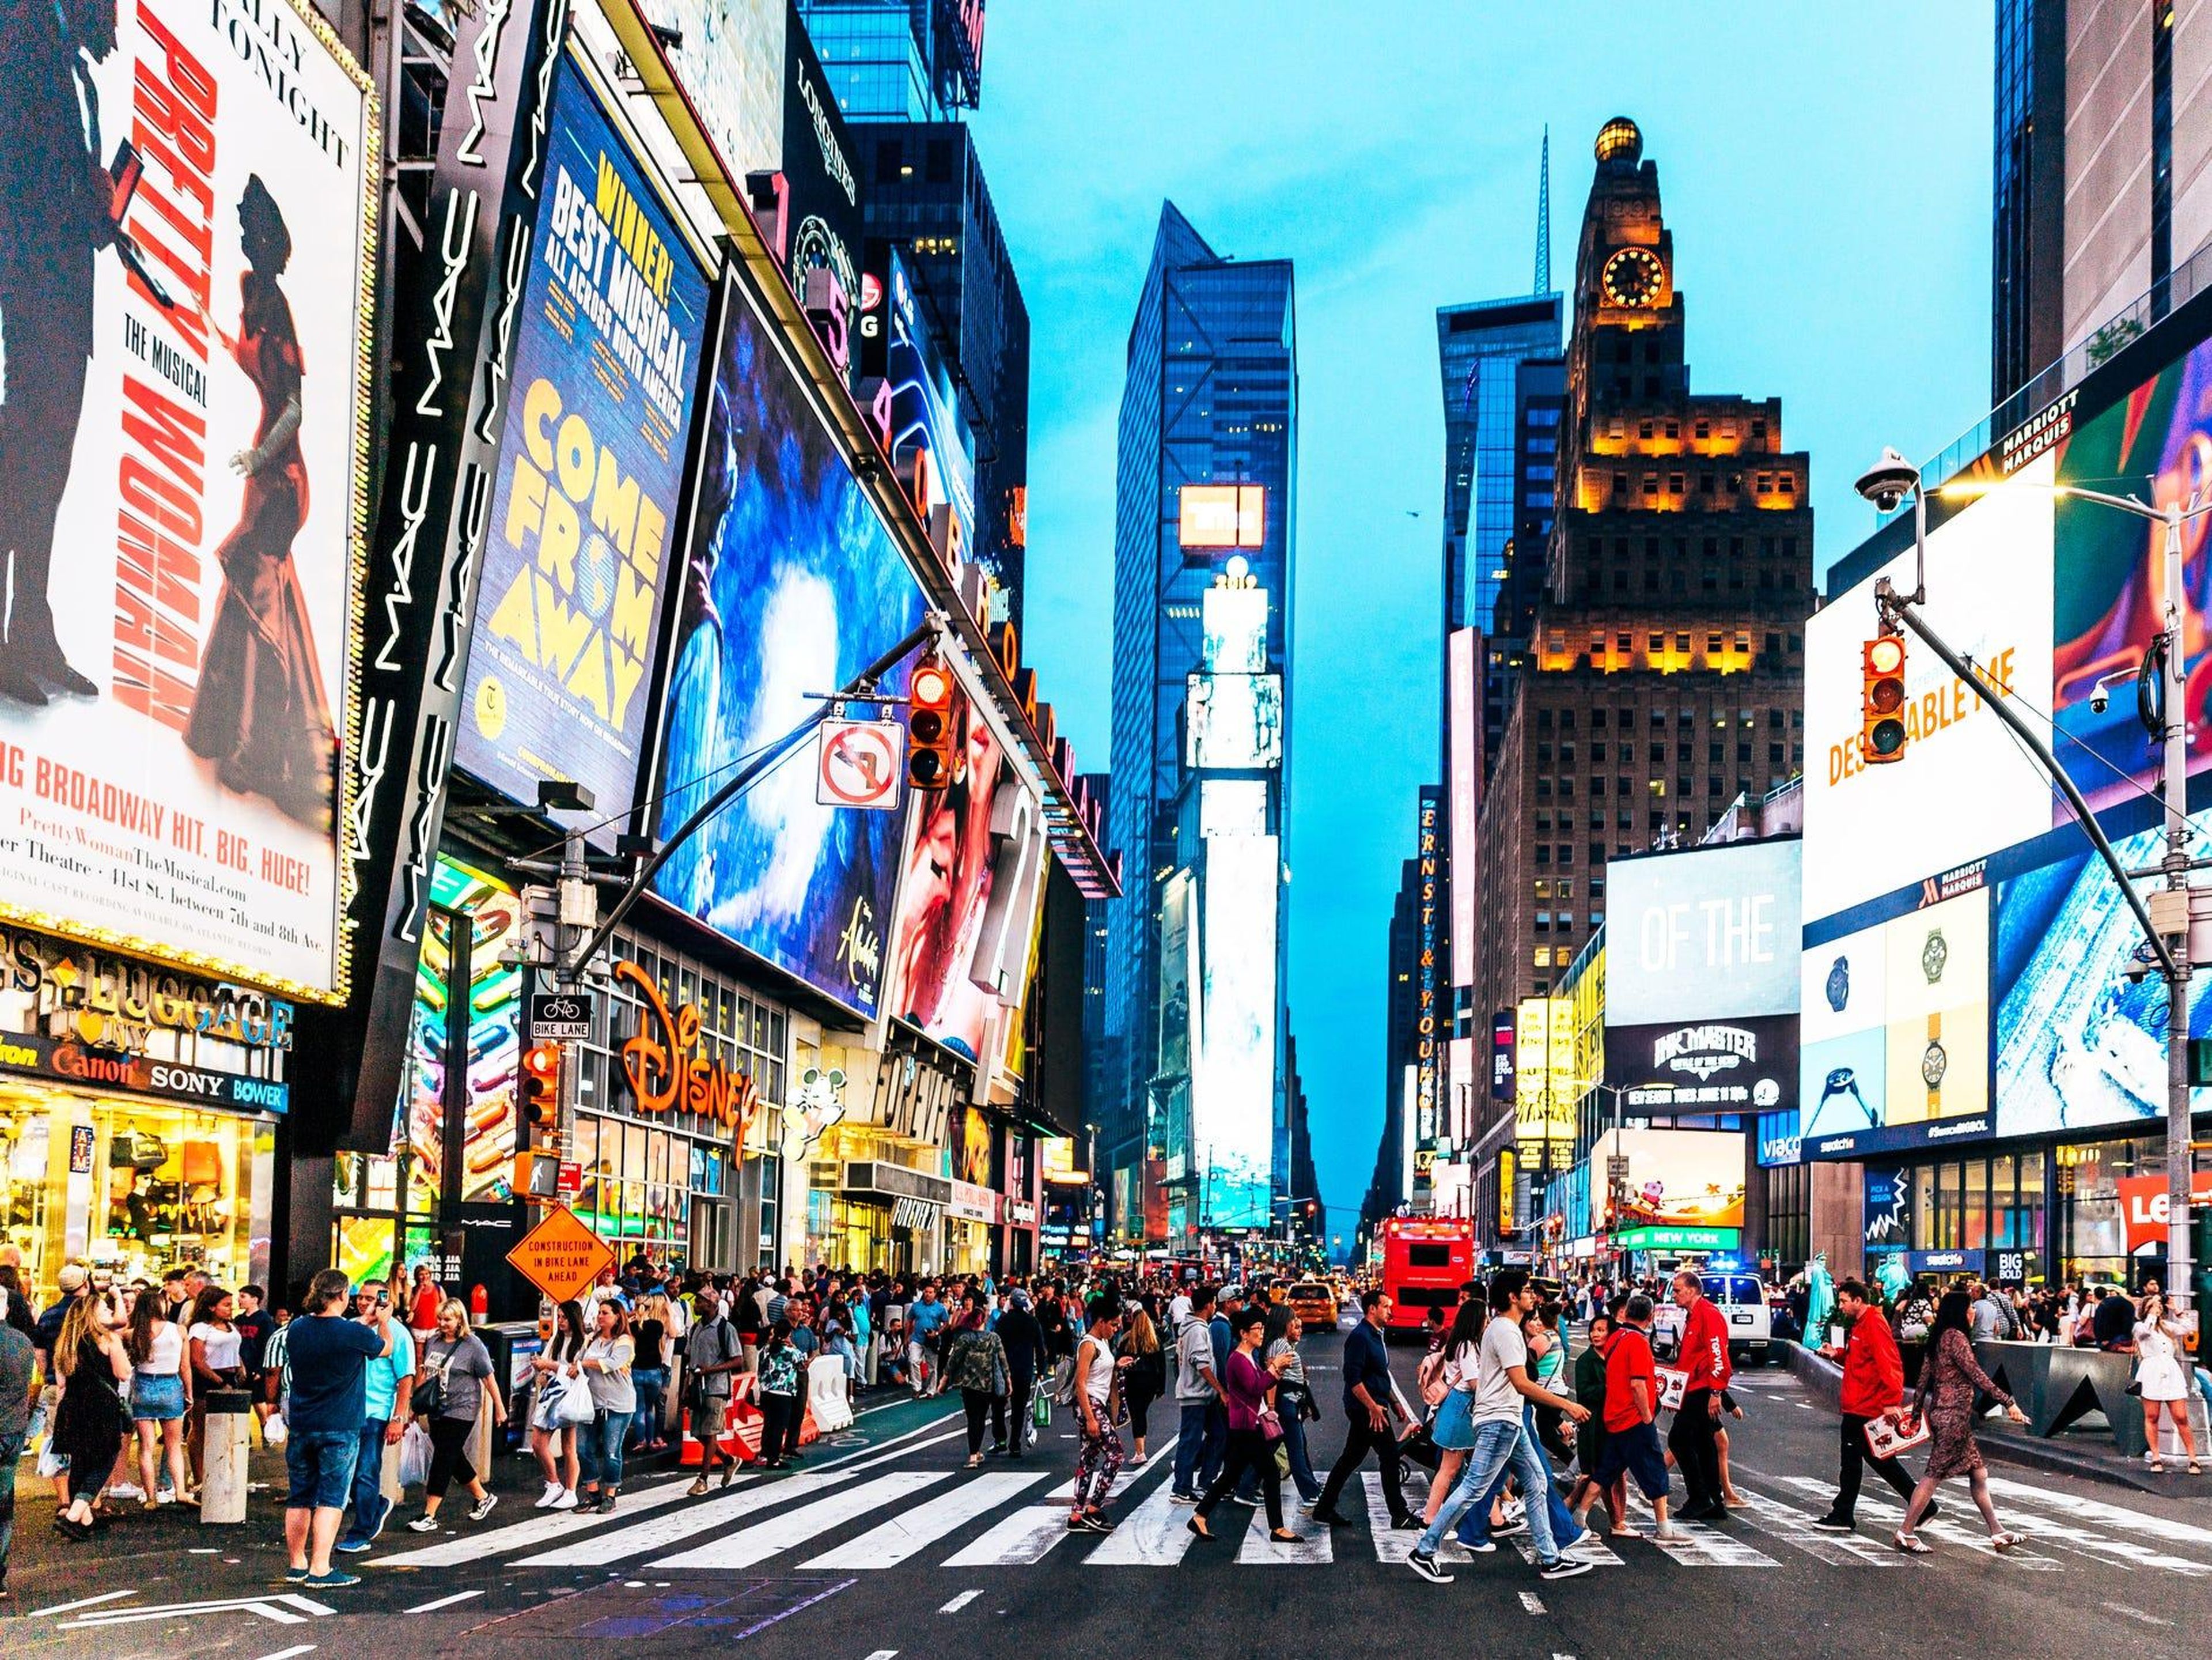 BEFORE: Locals may avoid it, but New York City's Times Square is one of the world's most visited tourist attractions. It sees nearly 380,000 pedestrians every day, according to Times Square Monthly Pedestrian Count Reports.